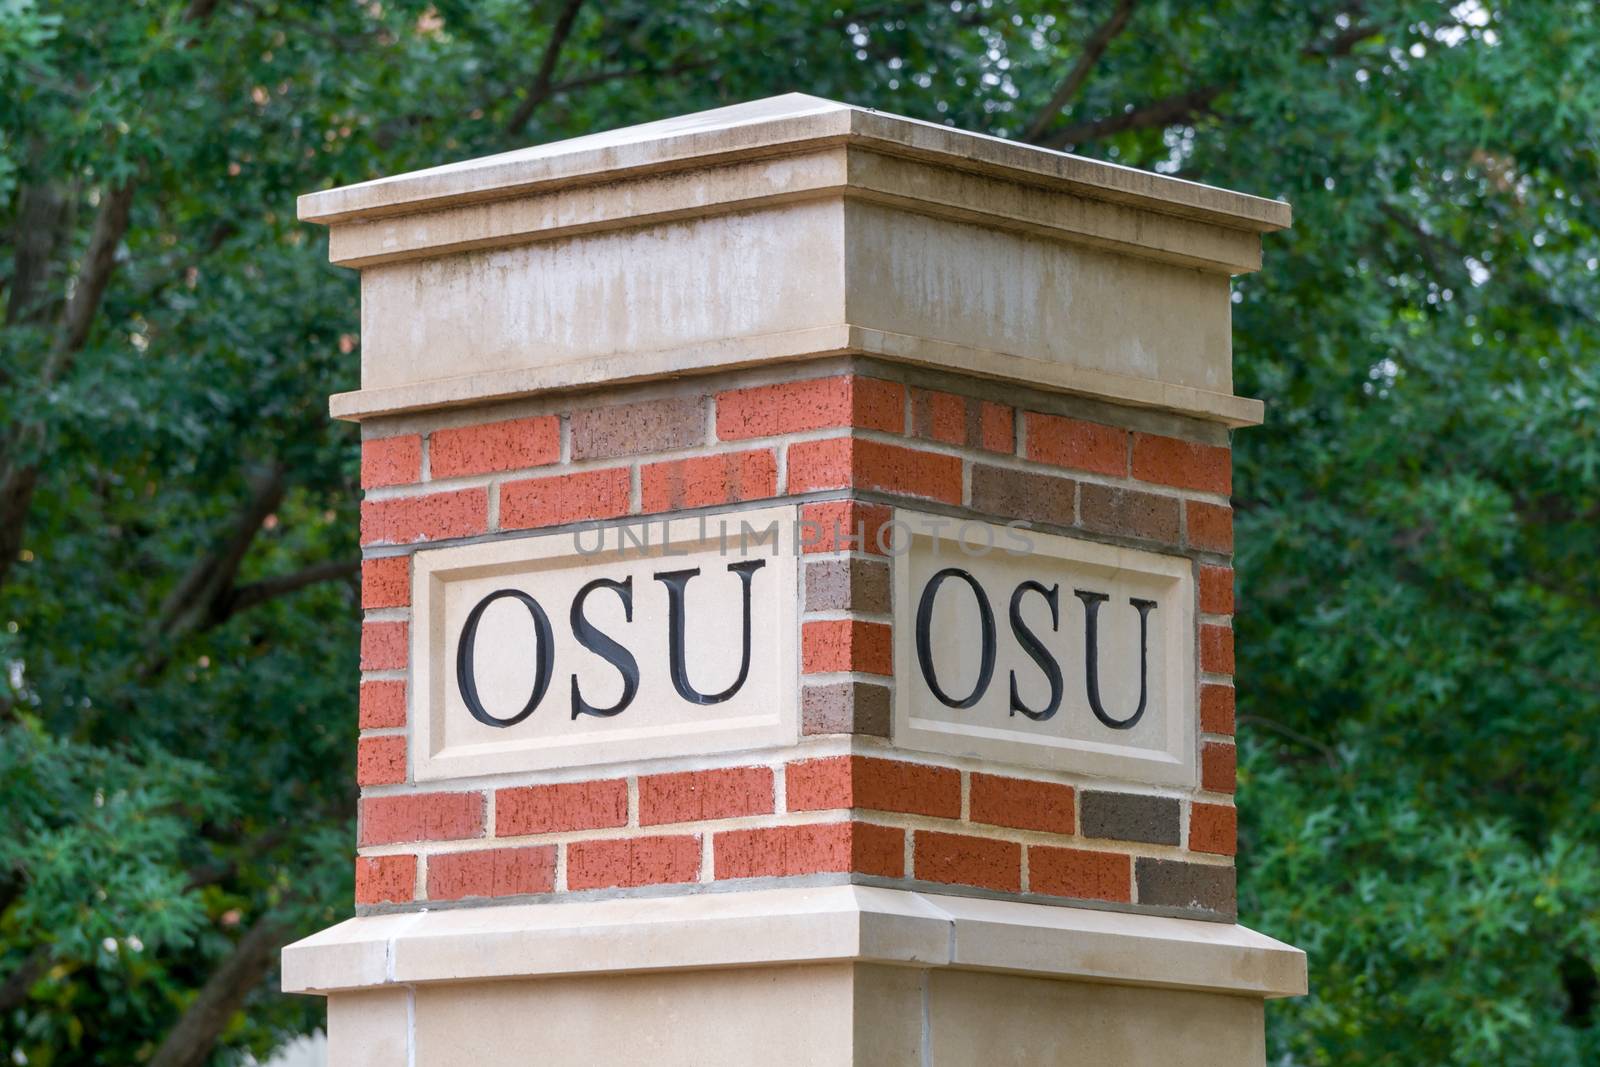 STILLWATER, OK/USA - MAY 20, 2016: OSU Lettering on column on the campus of Oklahoma State University.